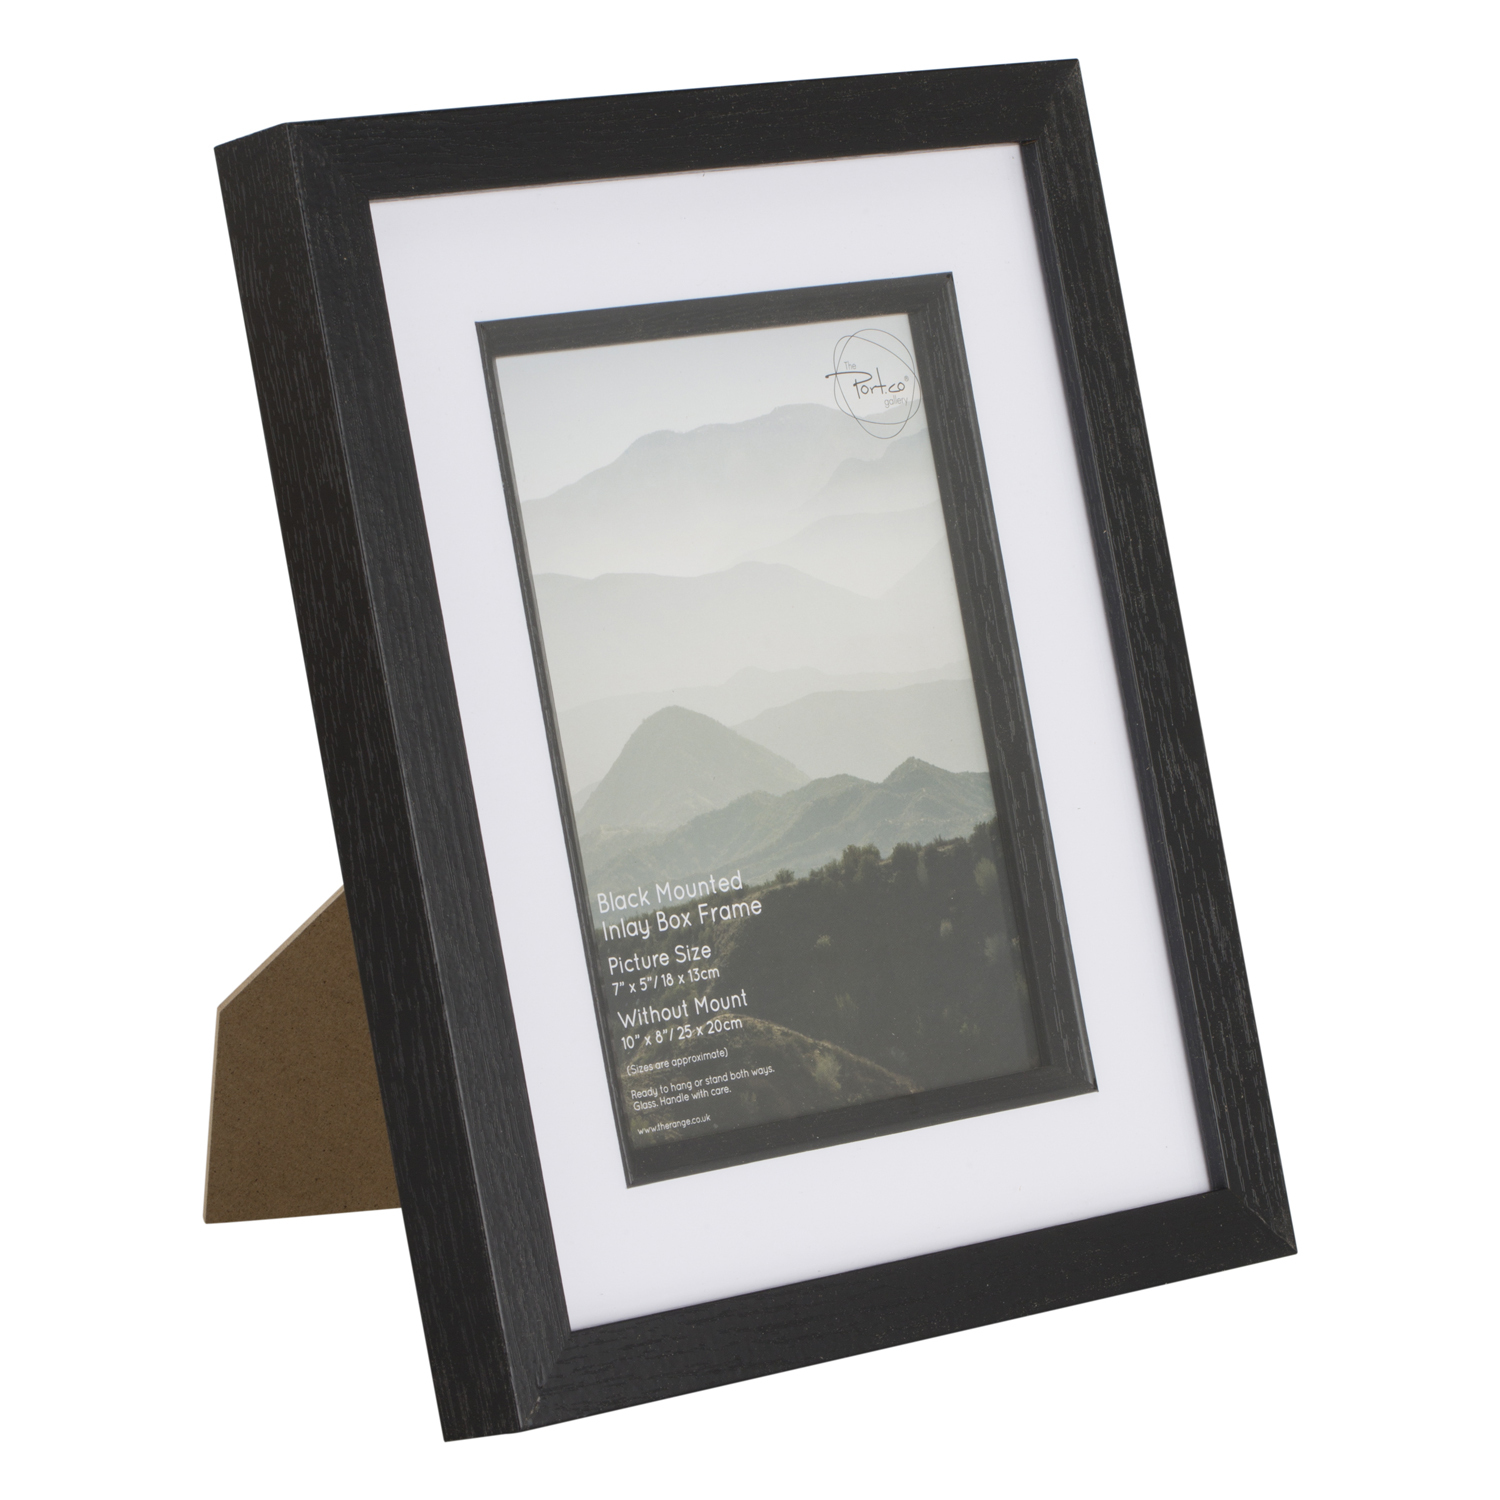 The Port Co Gallery Black Mounted Inlay Box Photo Frame 7 x 5 inch Image 2